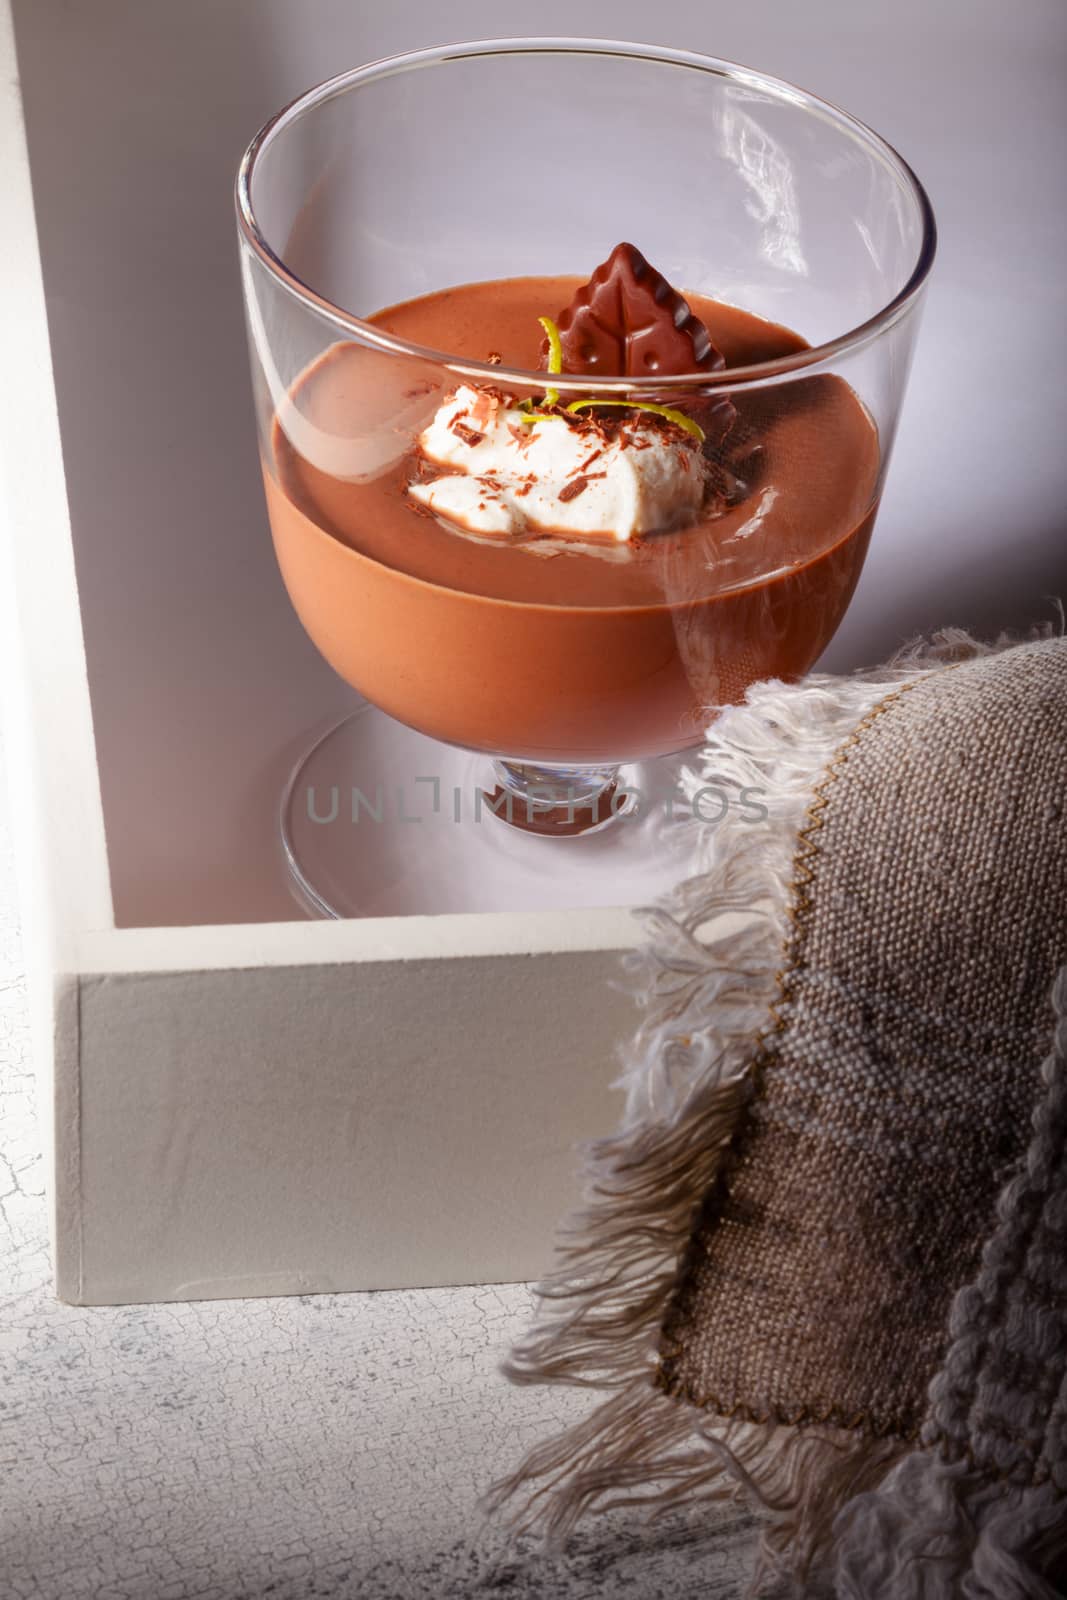 Chocolate Mousse Dessert by supercat67